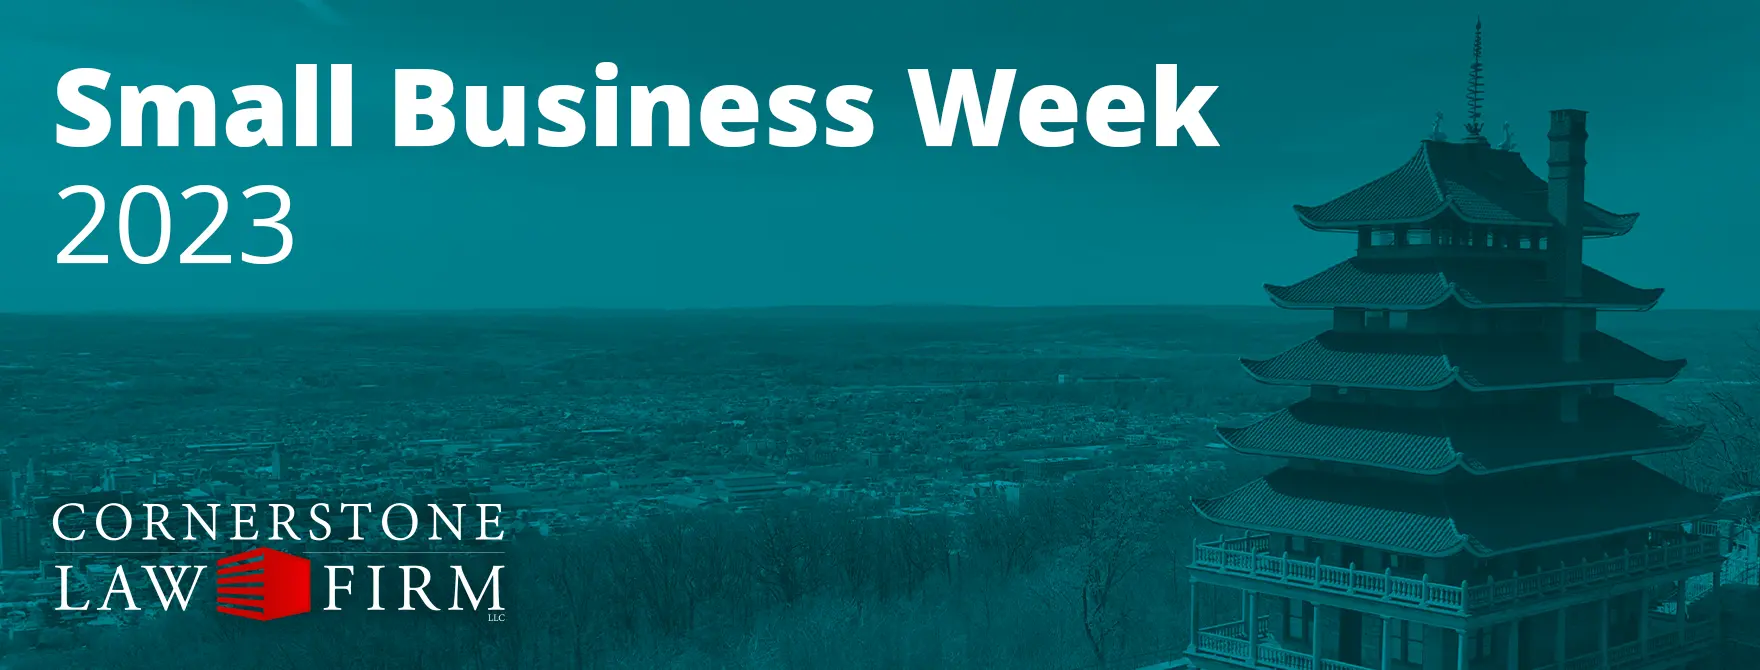 Turquoise small business week 2023 header image